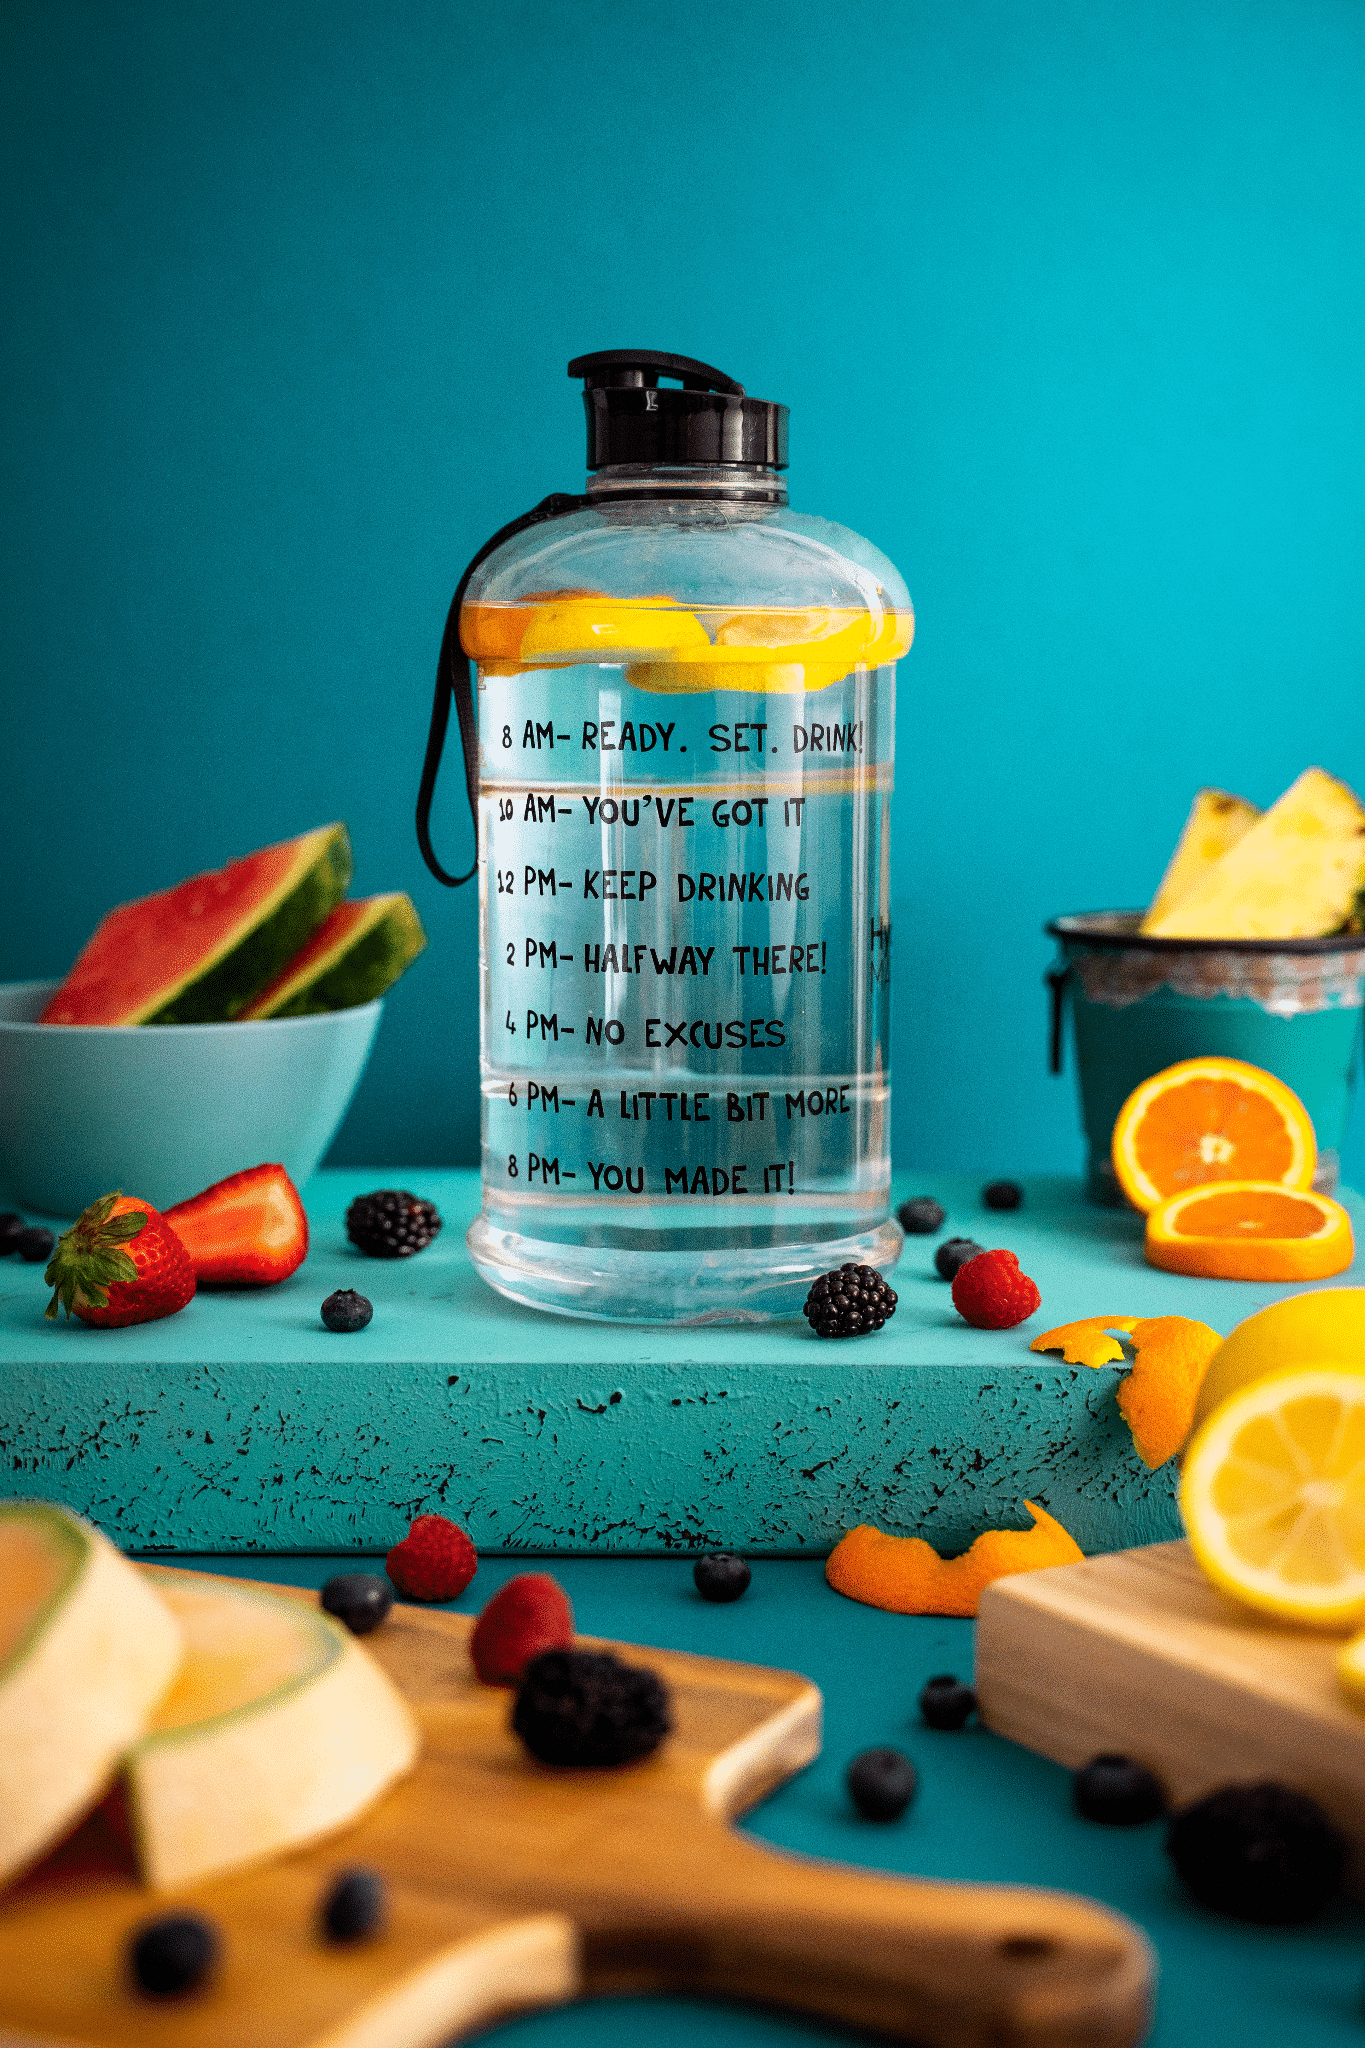 A Photo Of Berries, Lemons, Oranges And A Bottle Of Water.